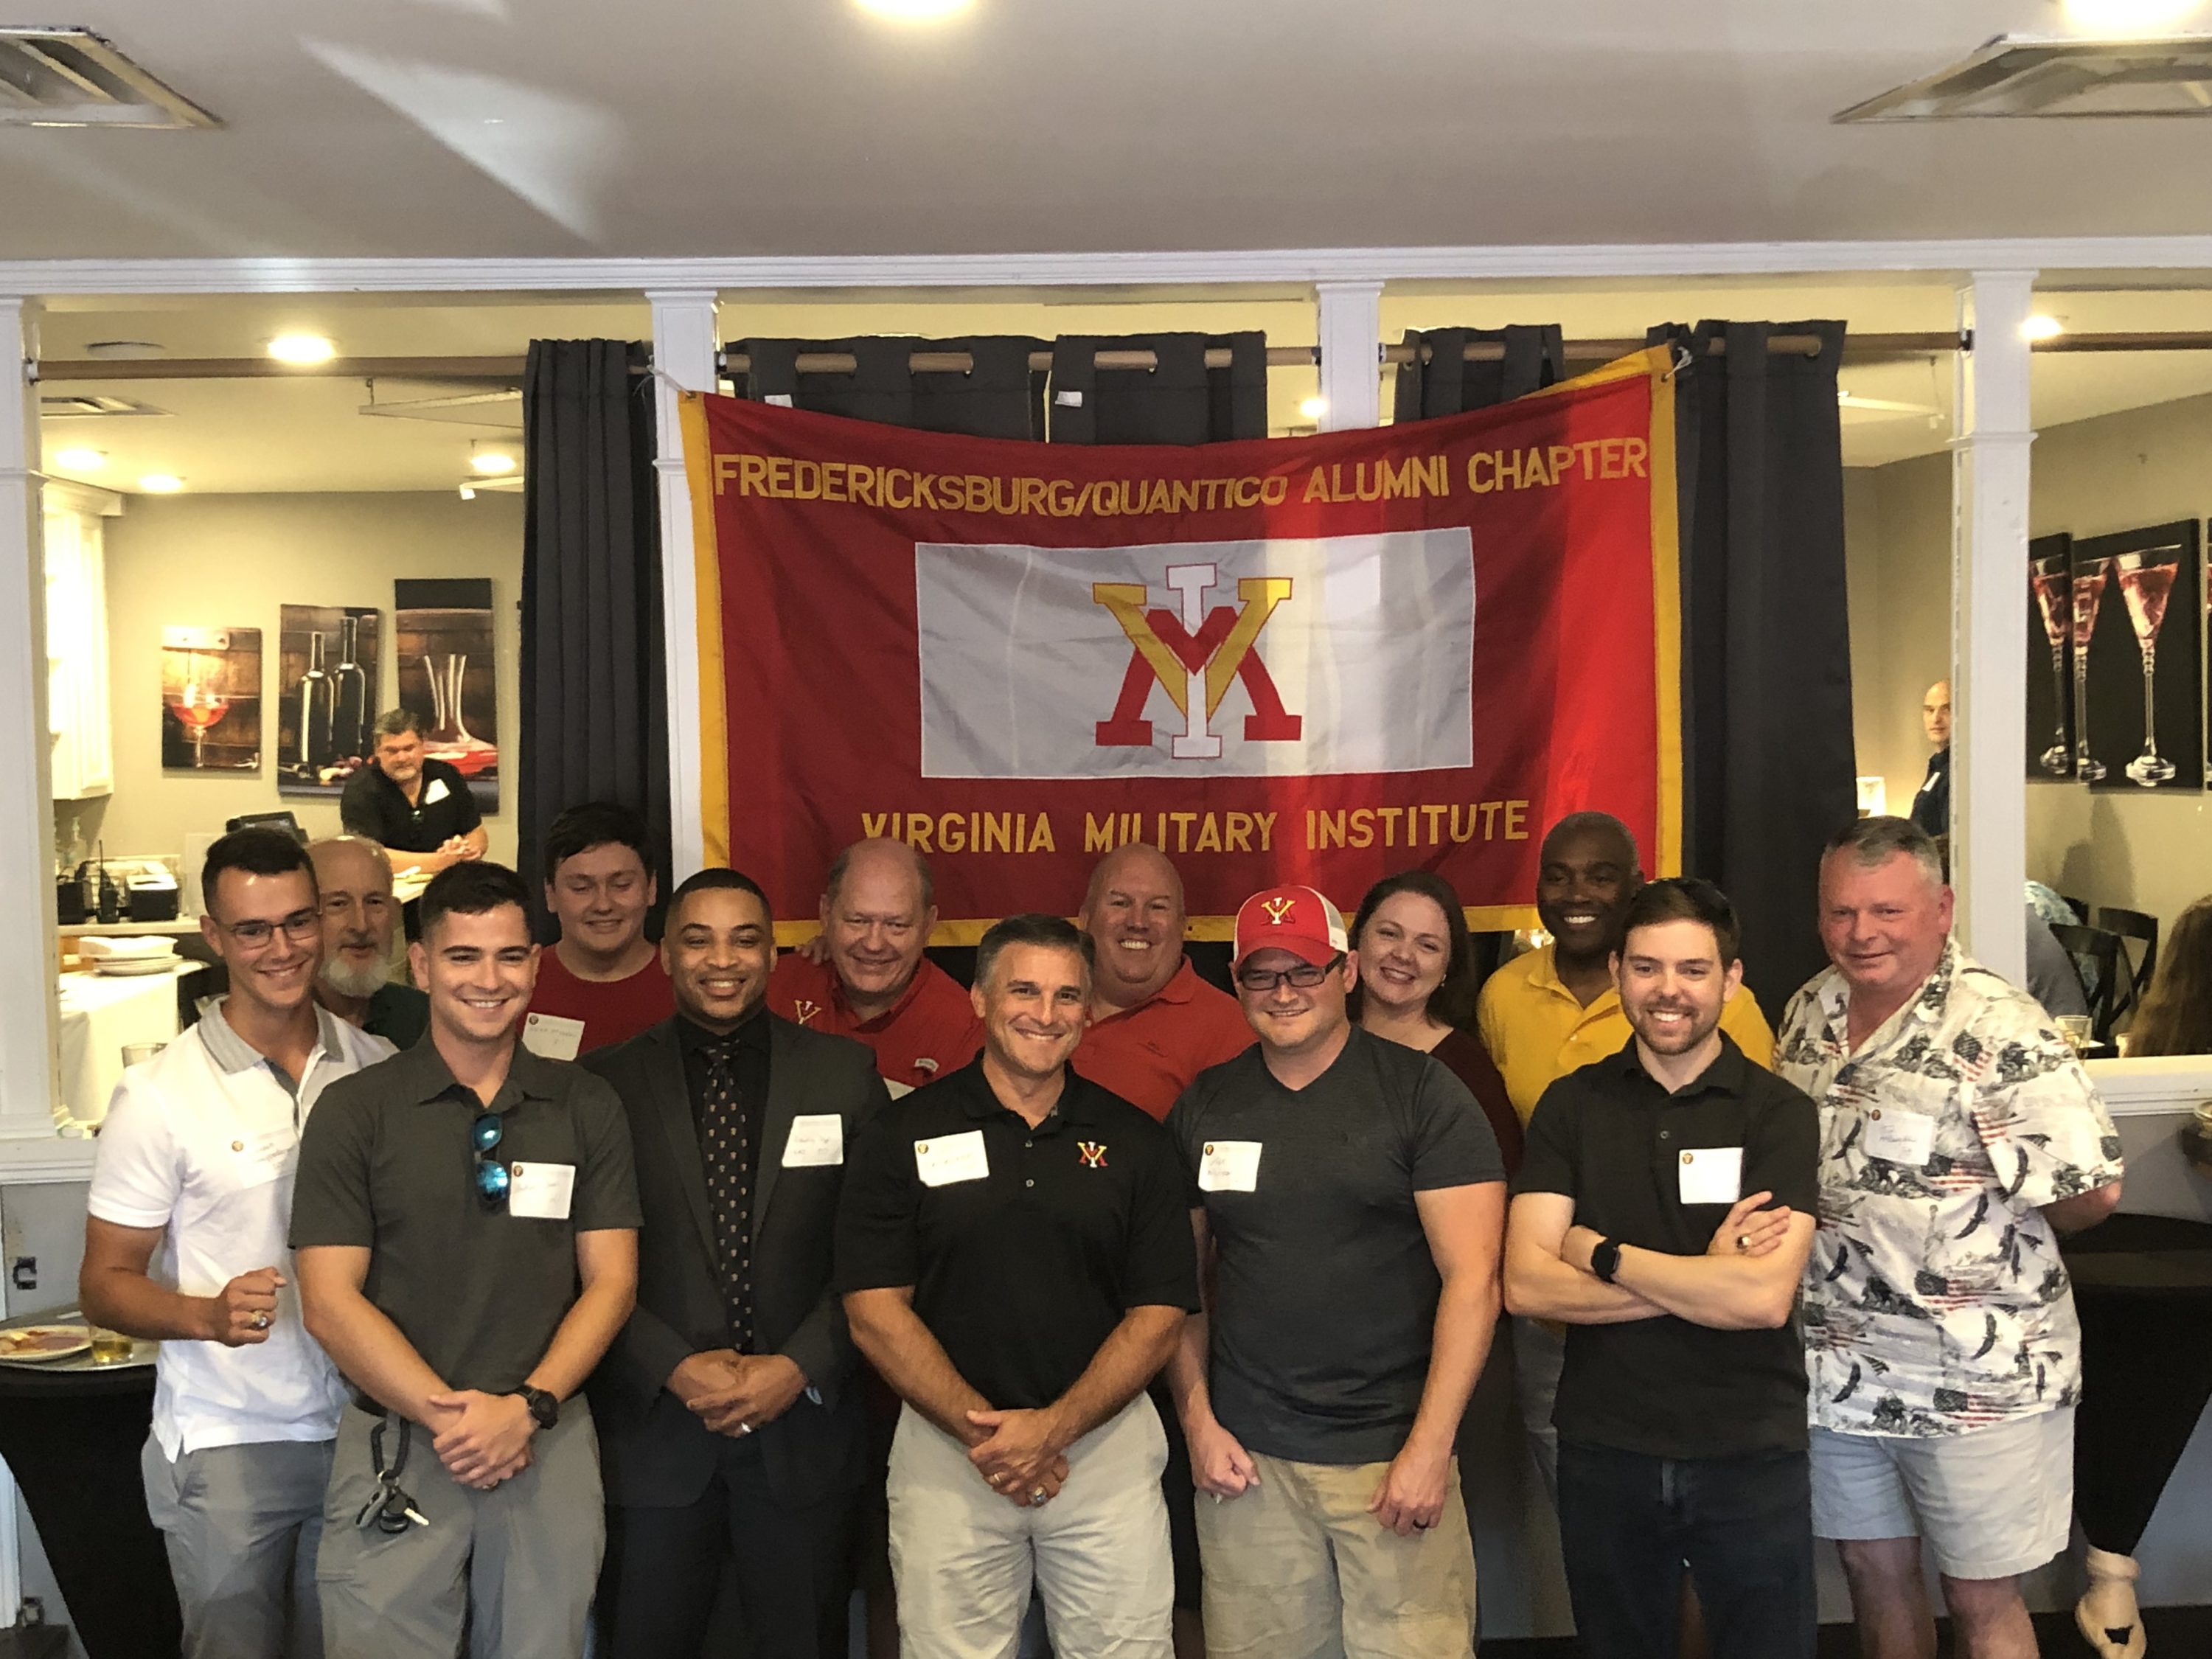 group of people posing with VMI flag, smiling